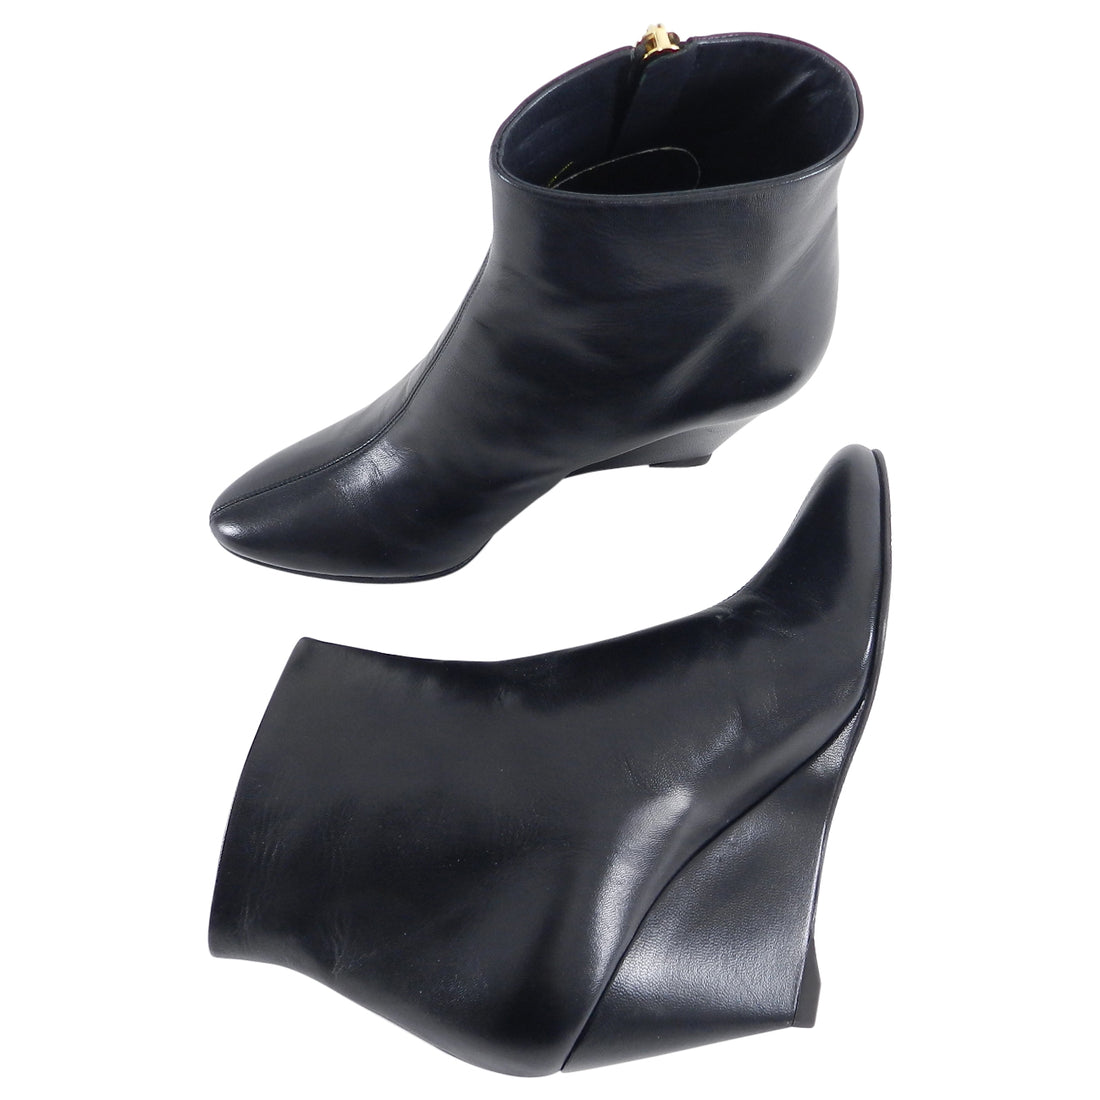 Giuseppe Zanotti Black Wedge Ankle Boots with Gold Zipper - 37